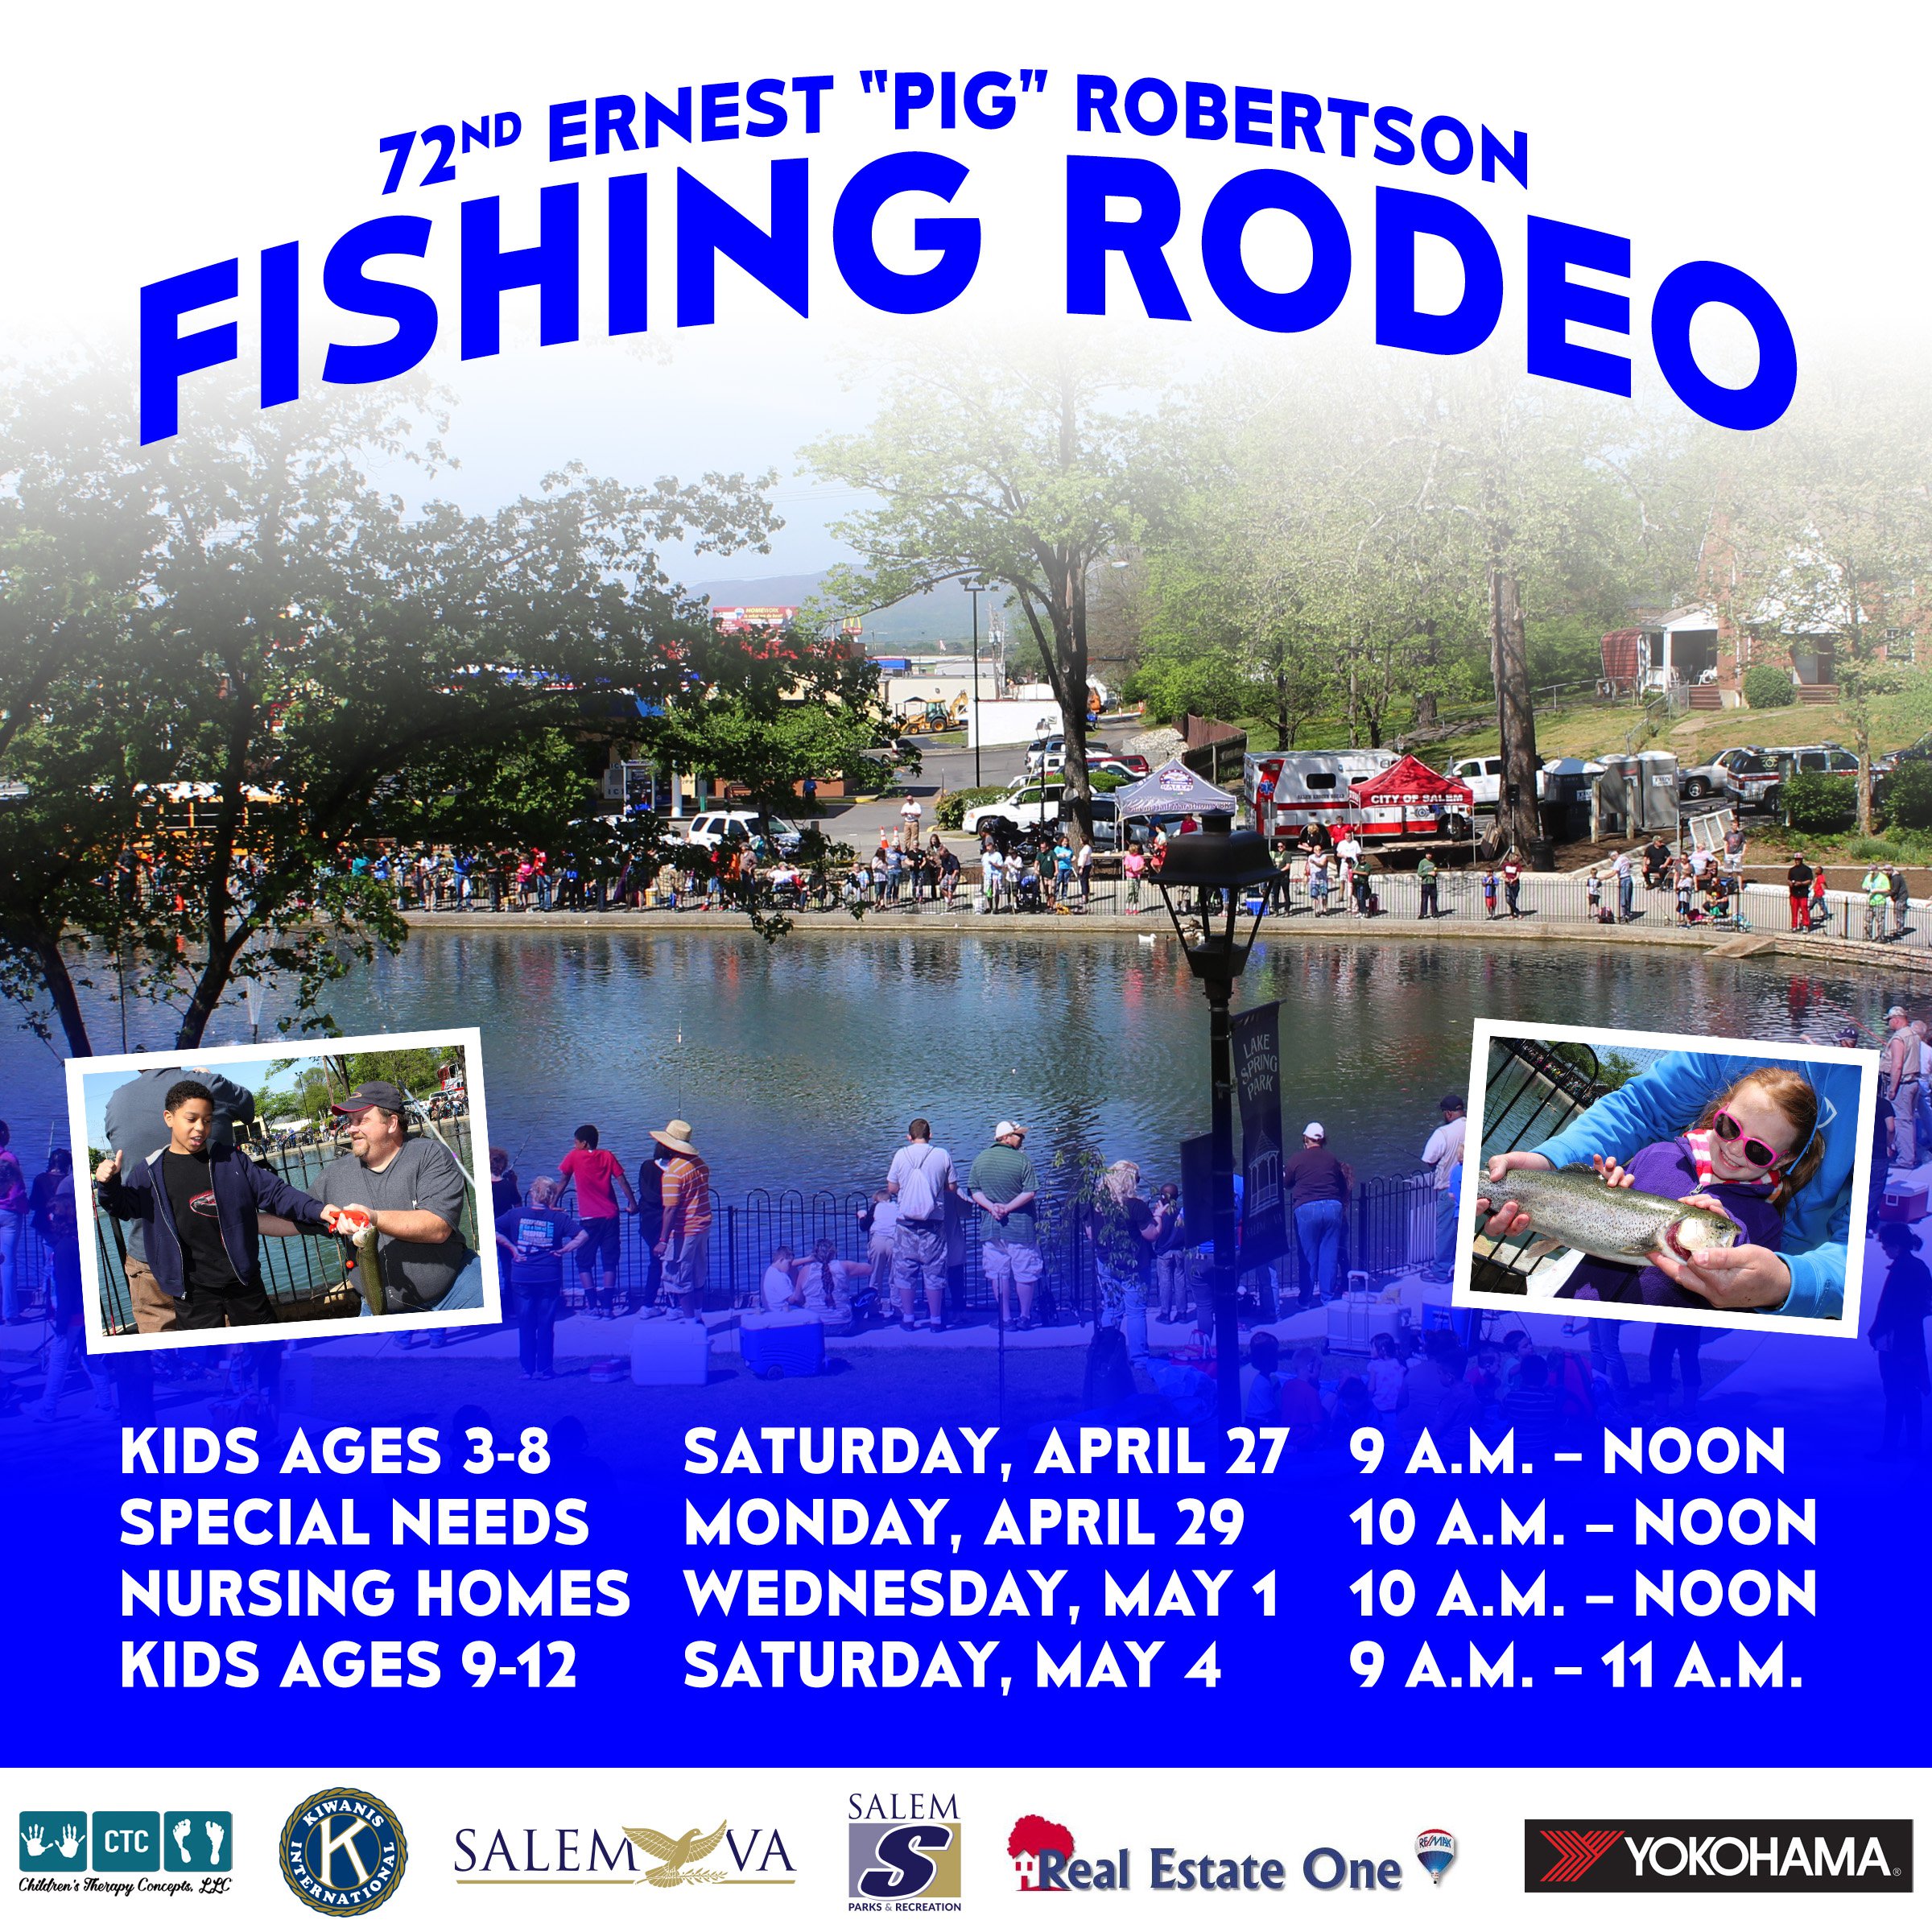 72nd Annual Ernest Pig Robertson Fishing Rodeo (Children 3-8 years old) 